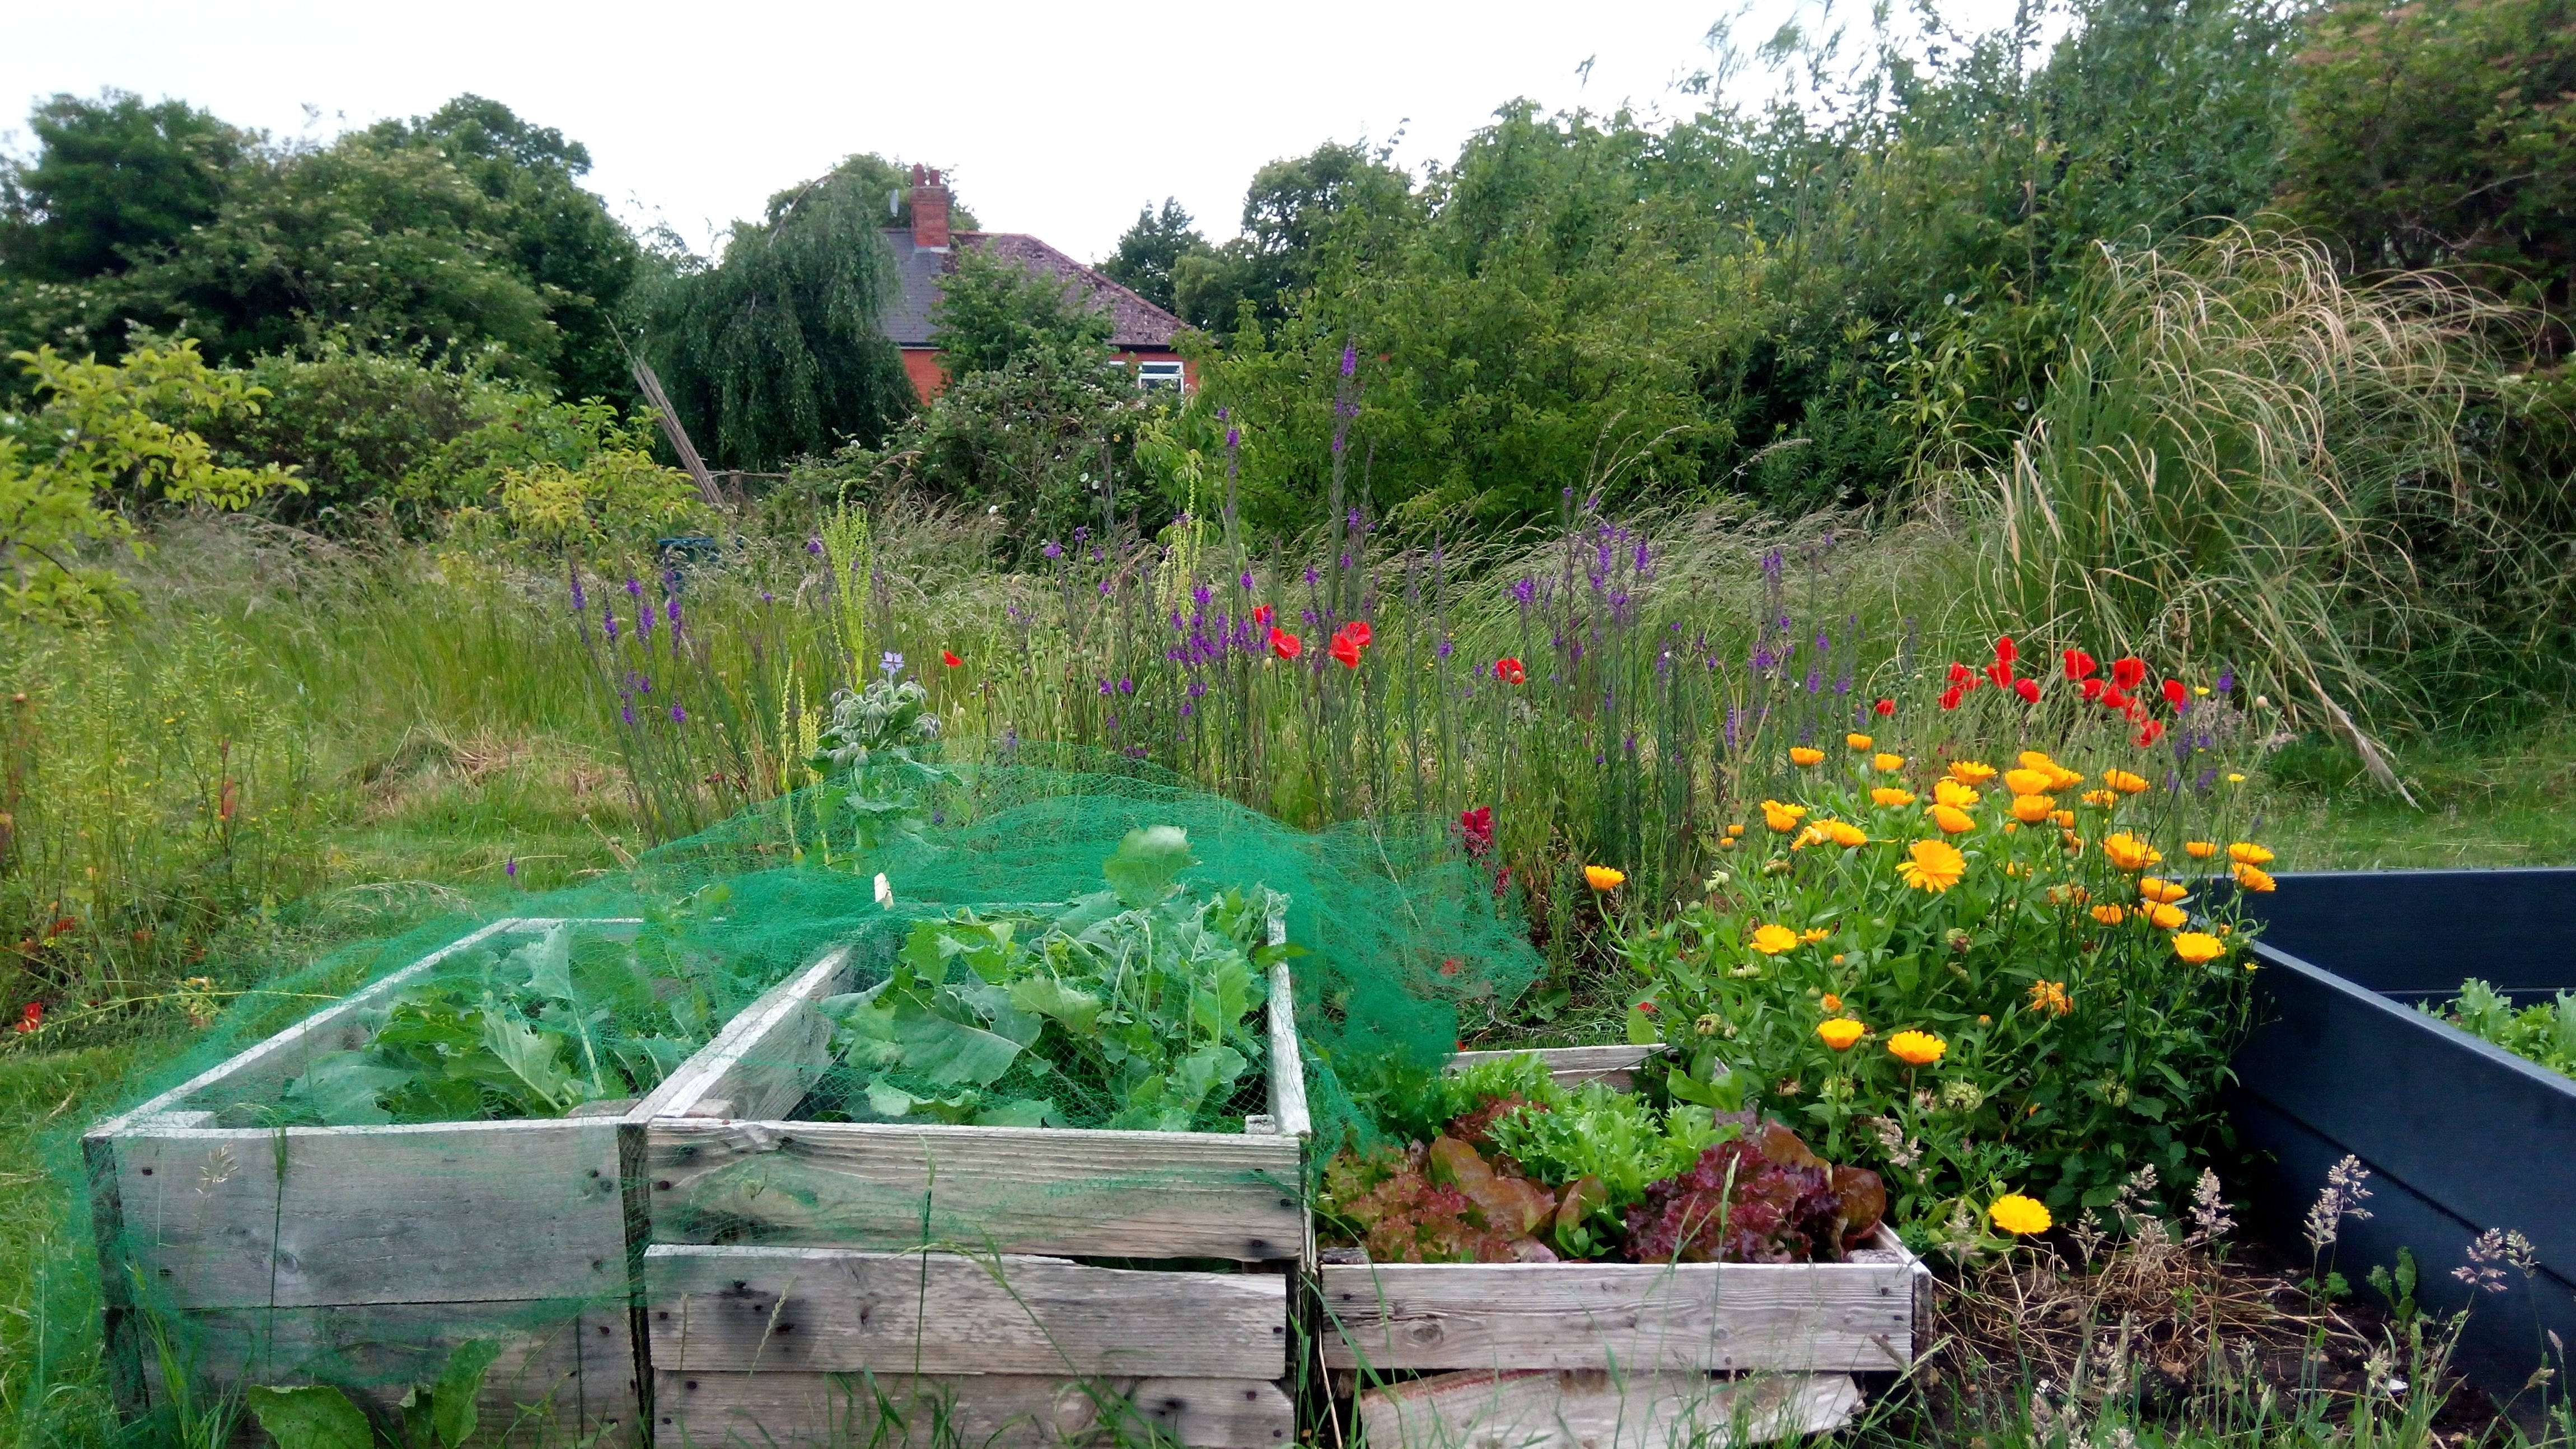 Welcome to my Lincoln allotment